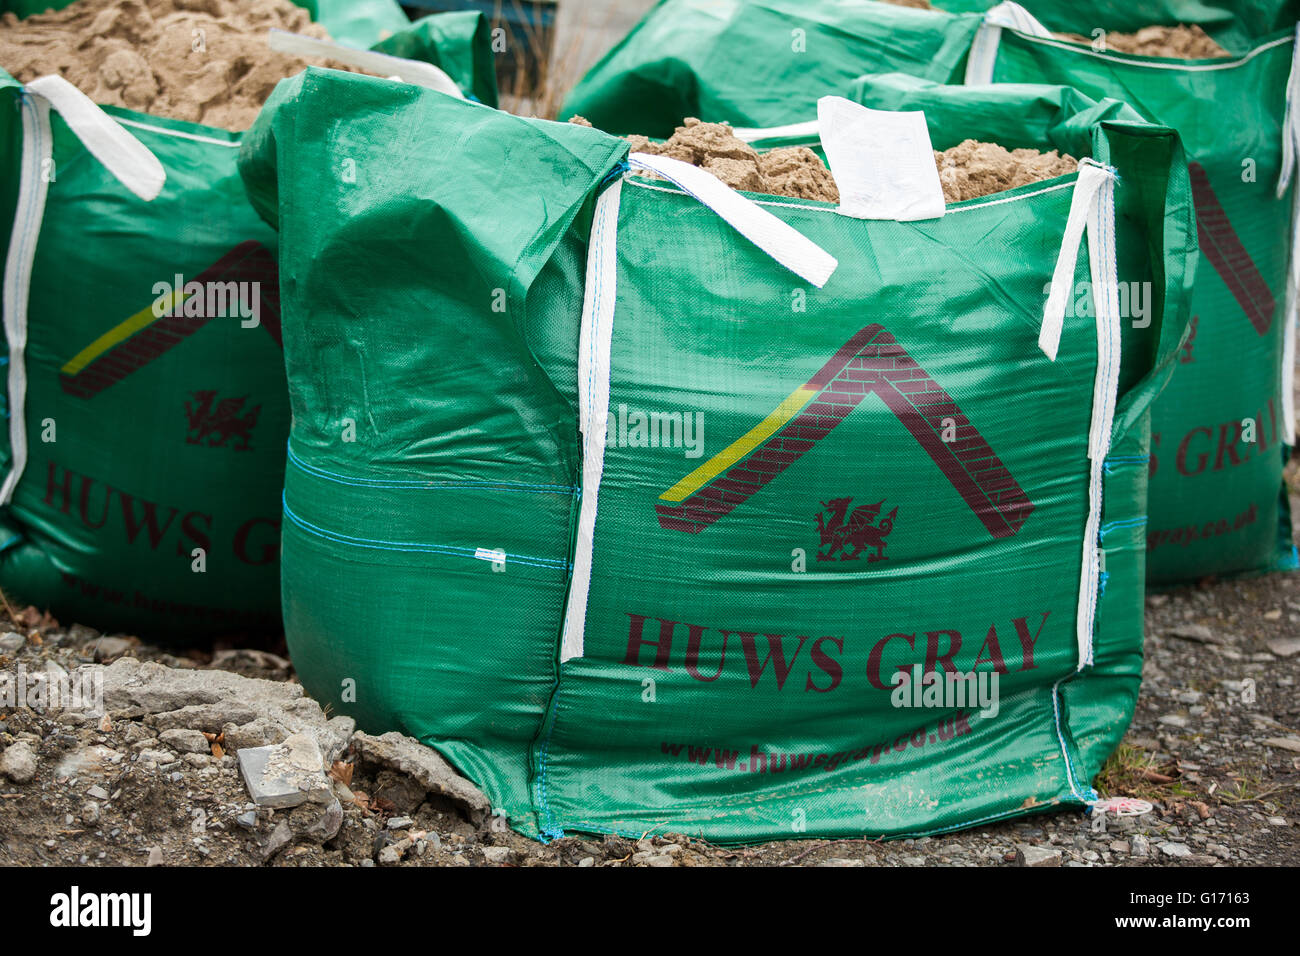 3 bags of Huws Gray builders merchant sand Stock Photo